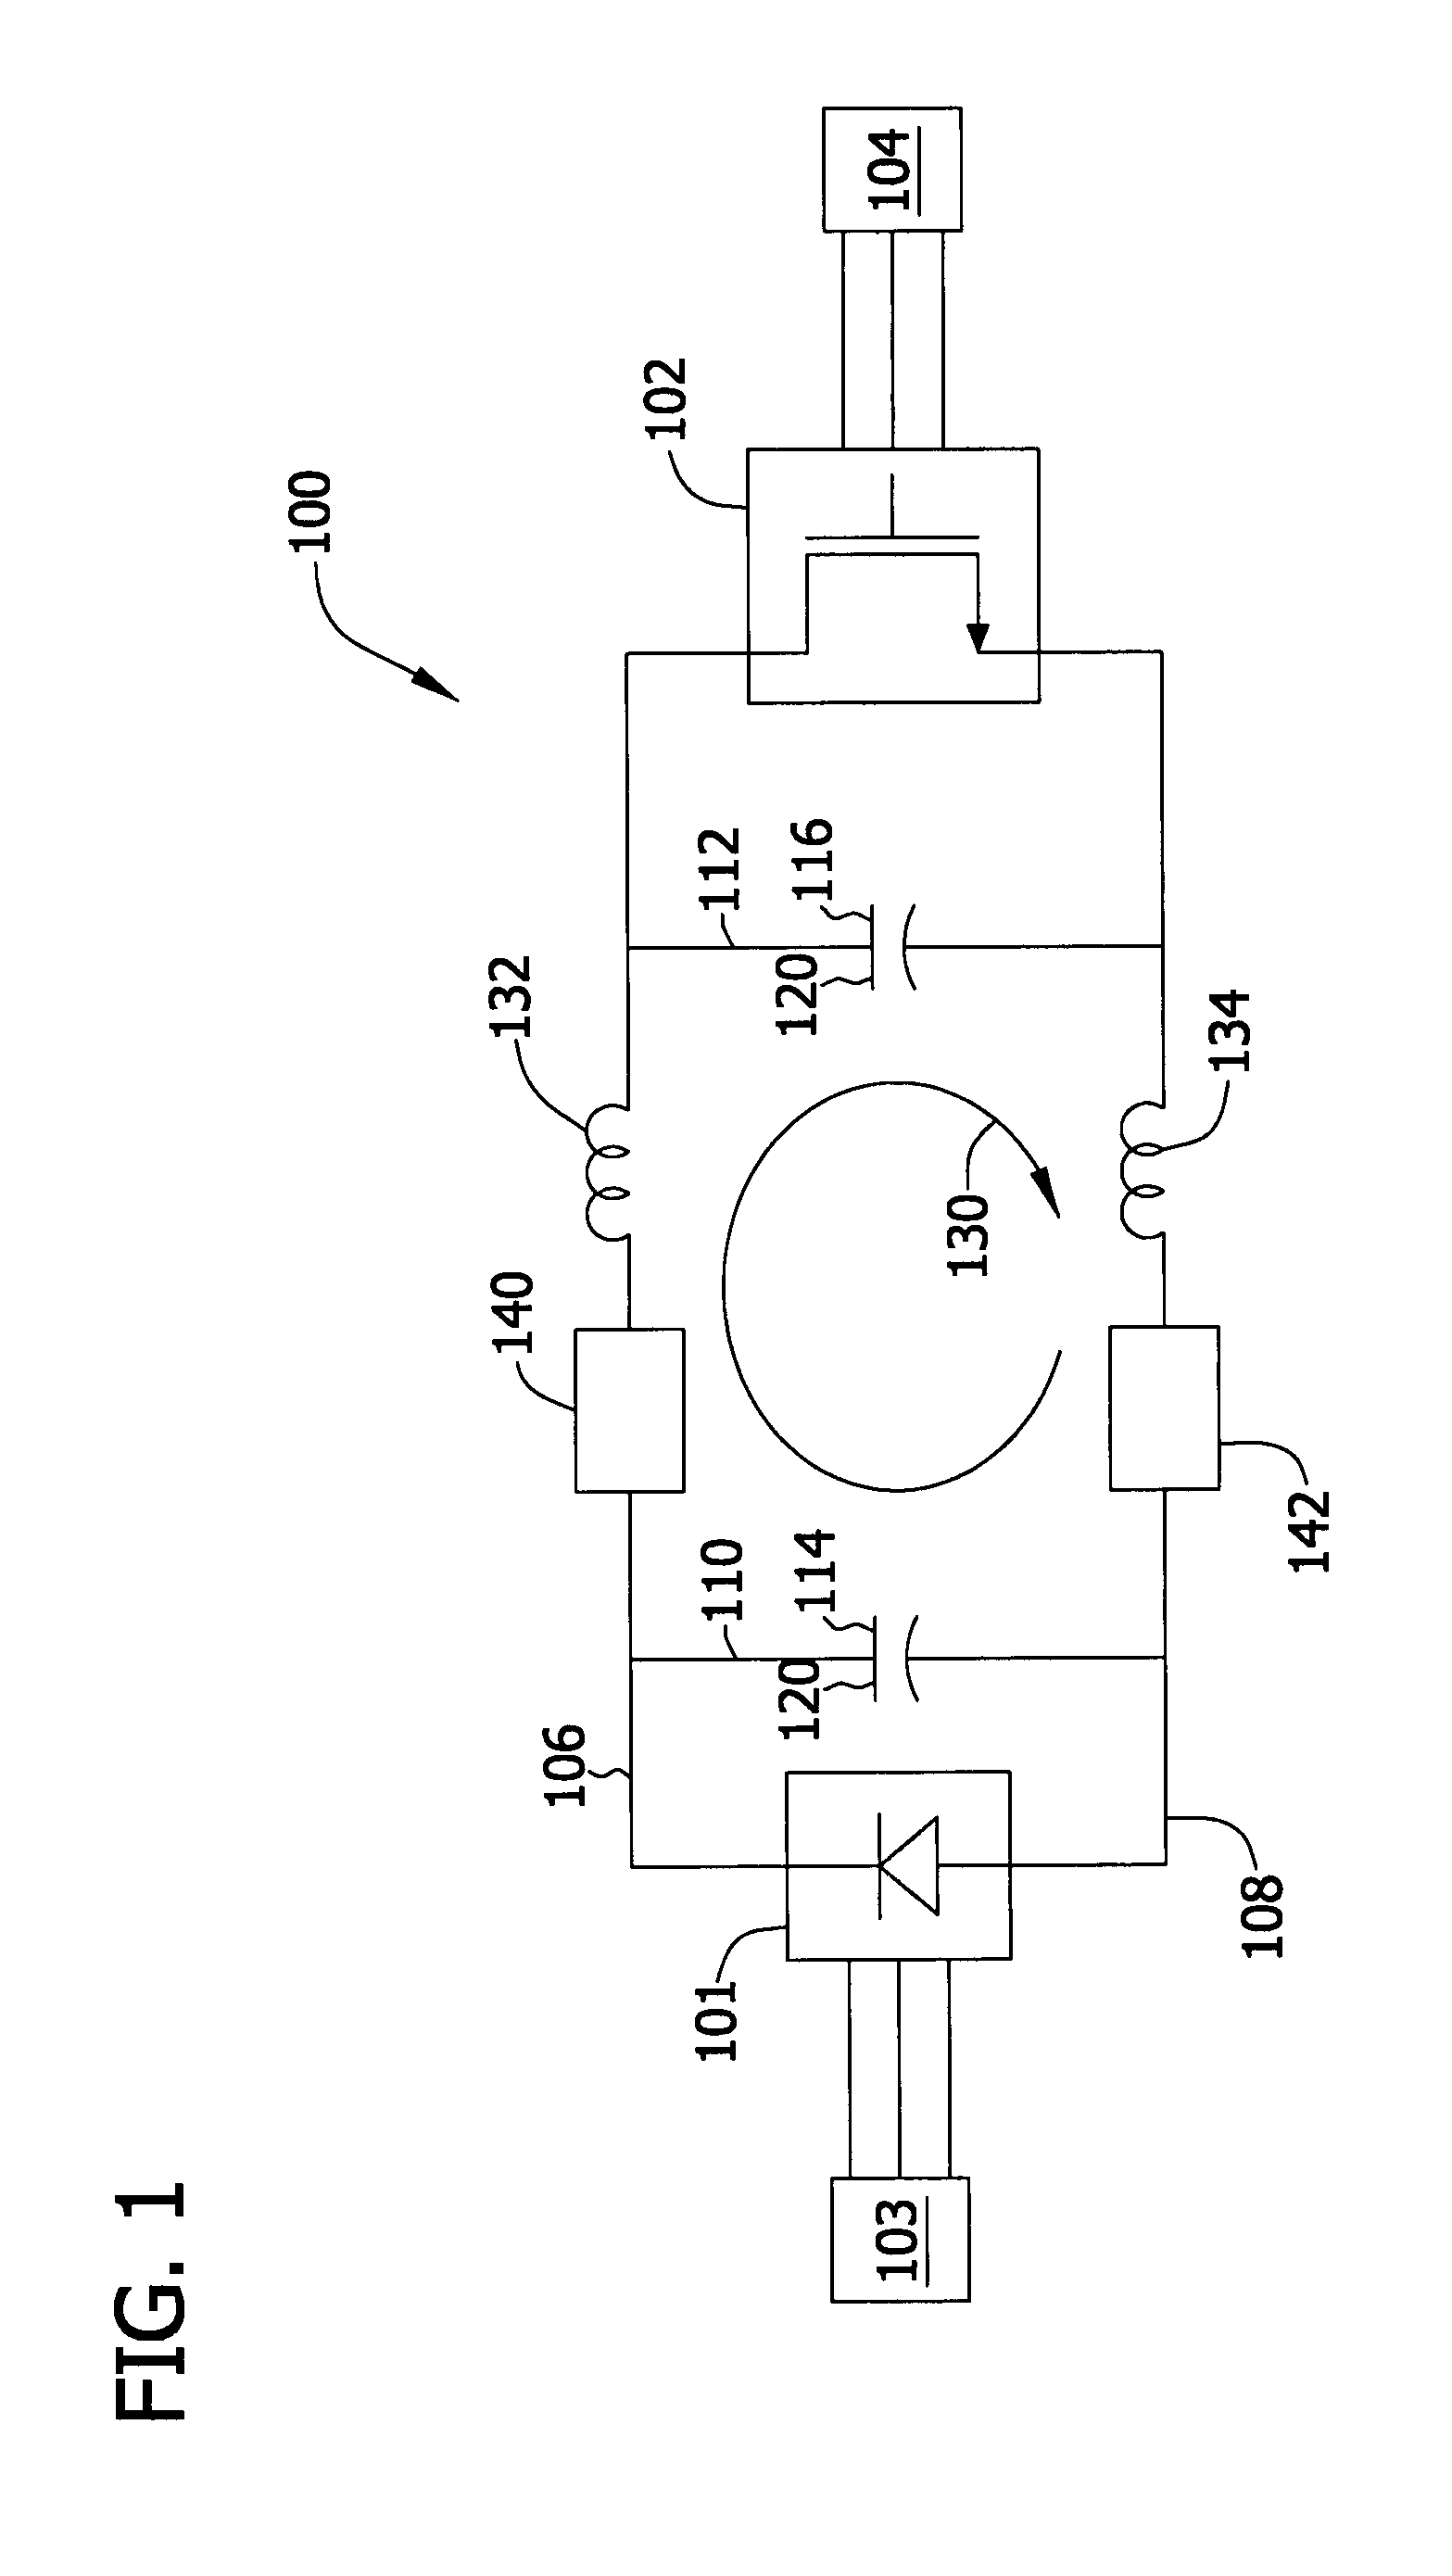 Systems and methods for suppressing resonances in power converters